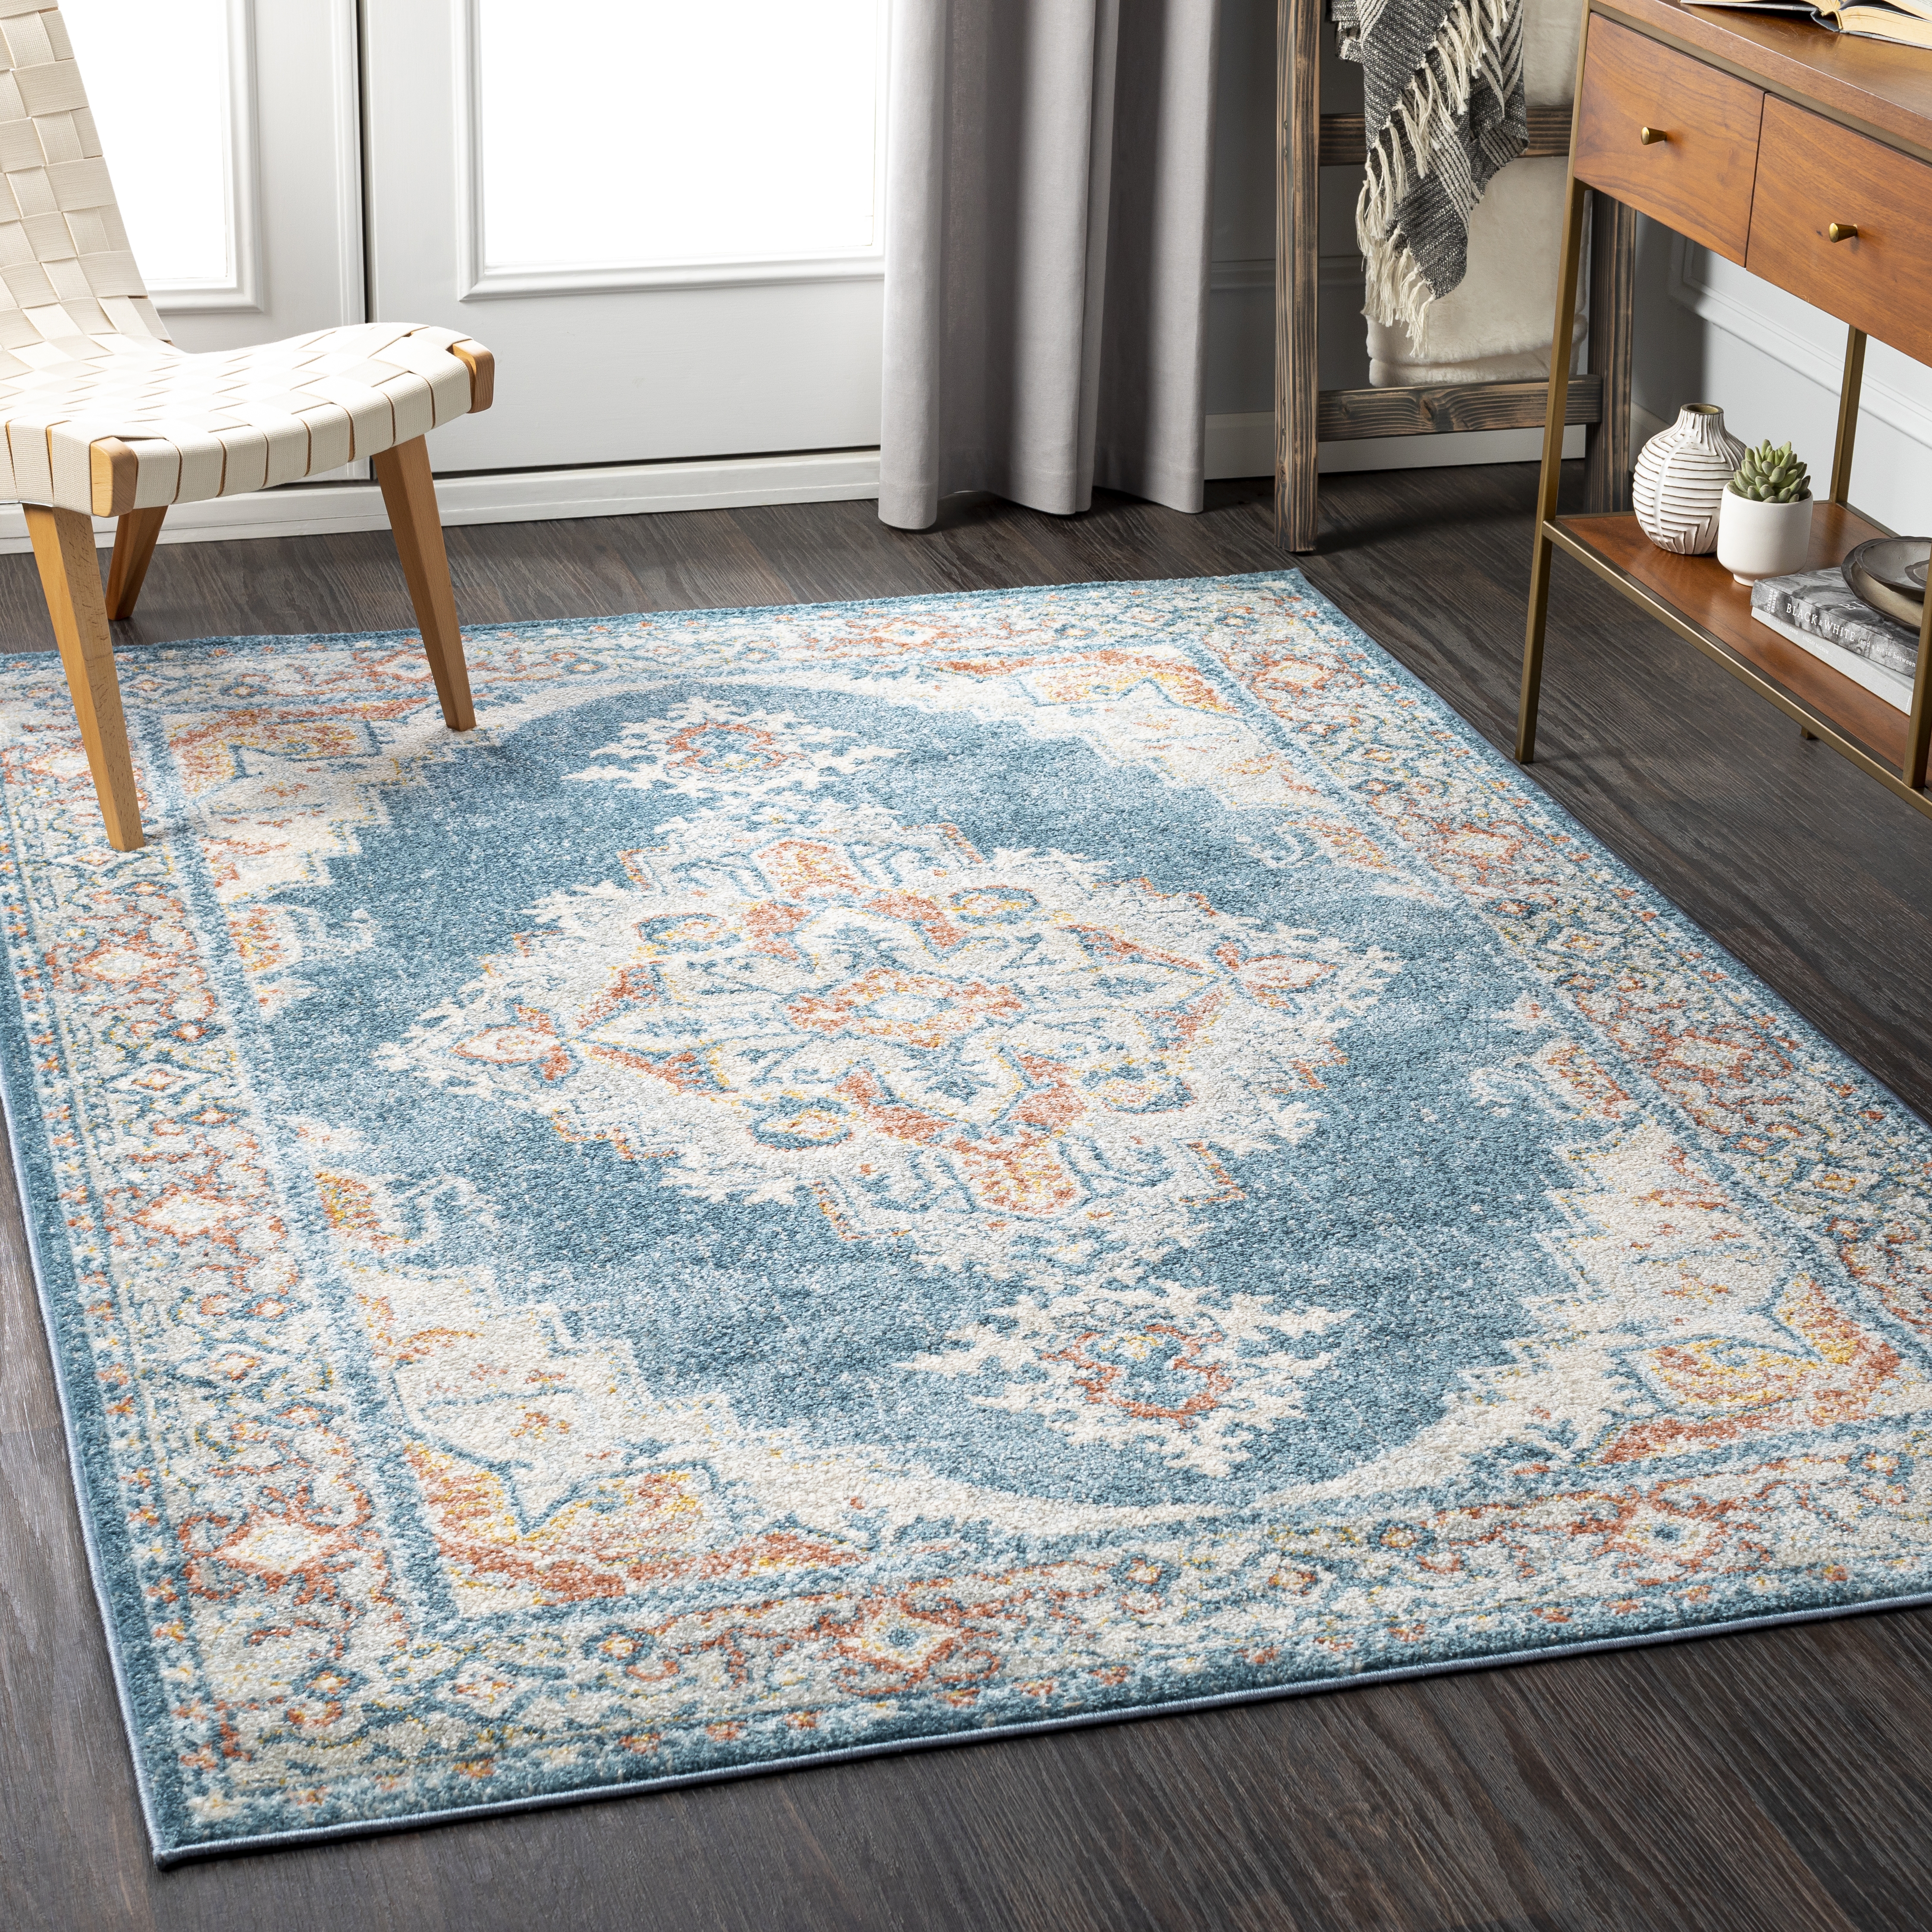 Chester Rug, 7'10" x 10'3", Blue - Image 5